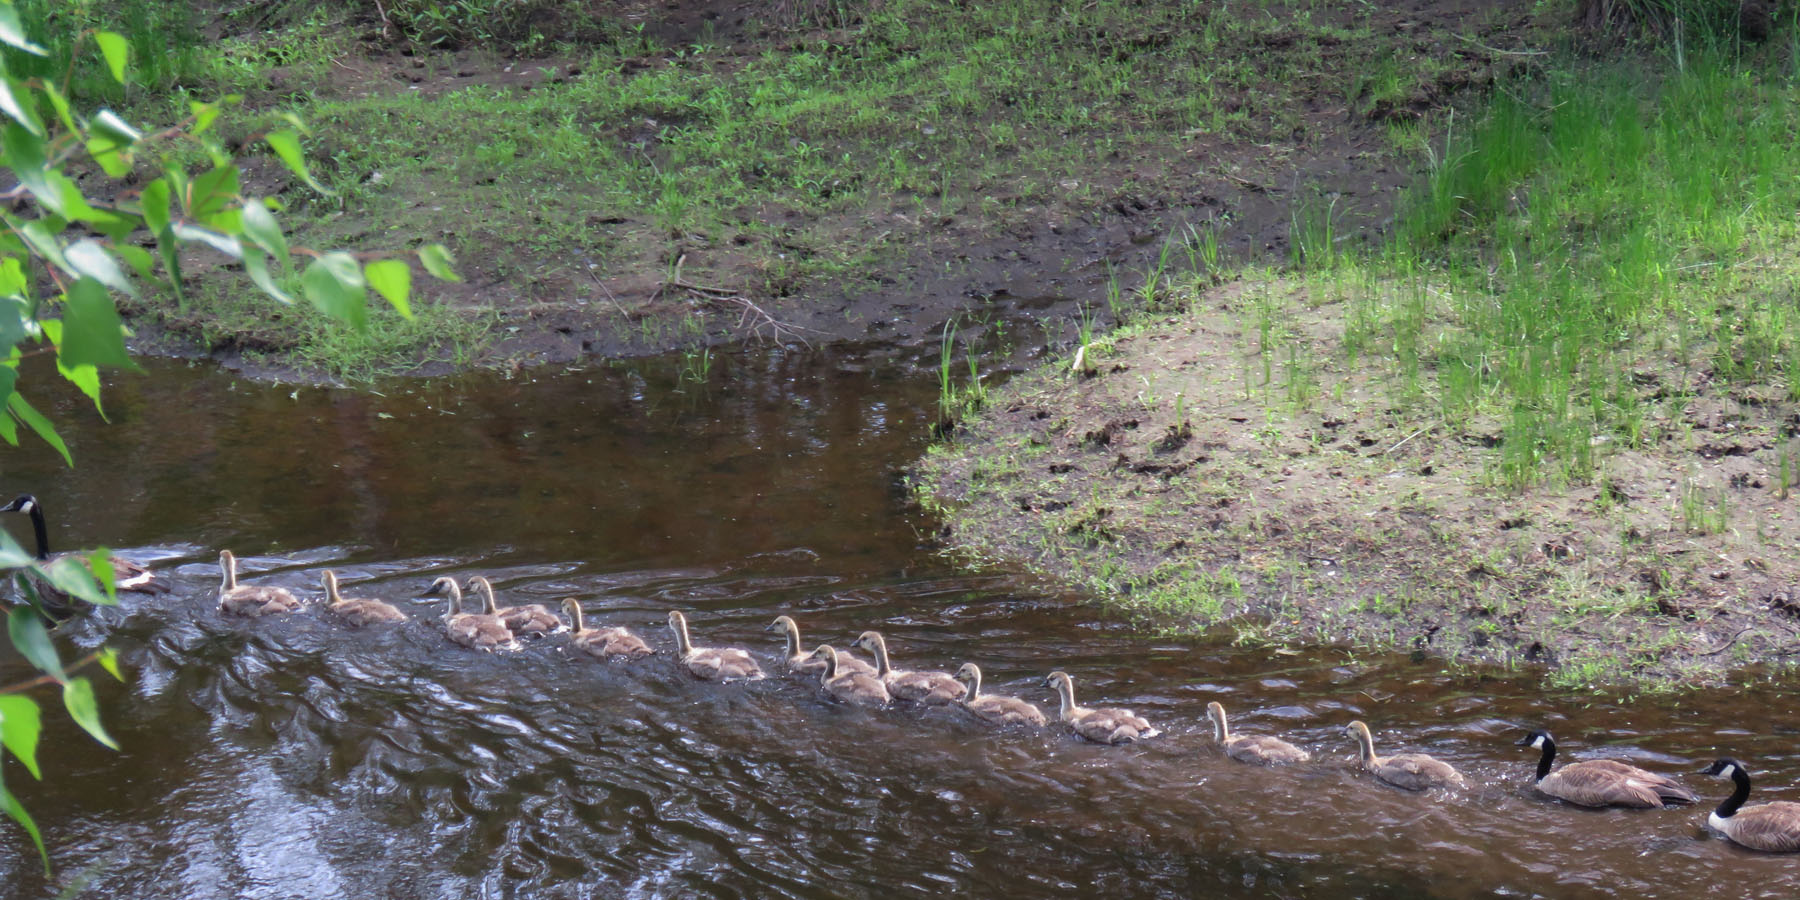 Family group of geese and goslings